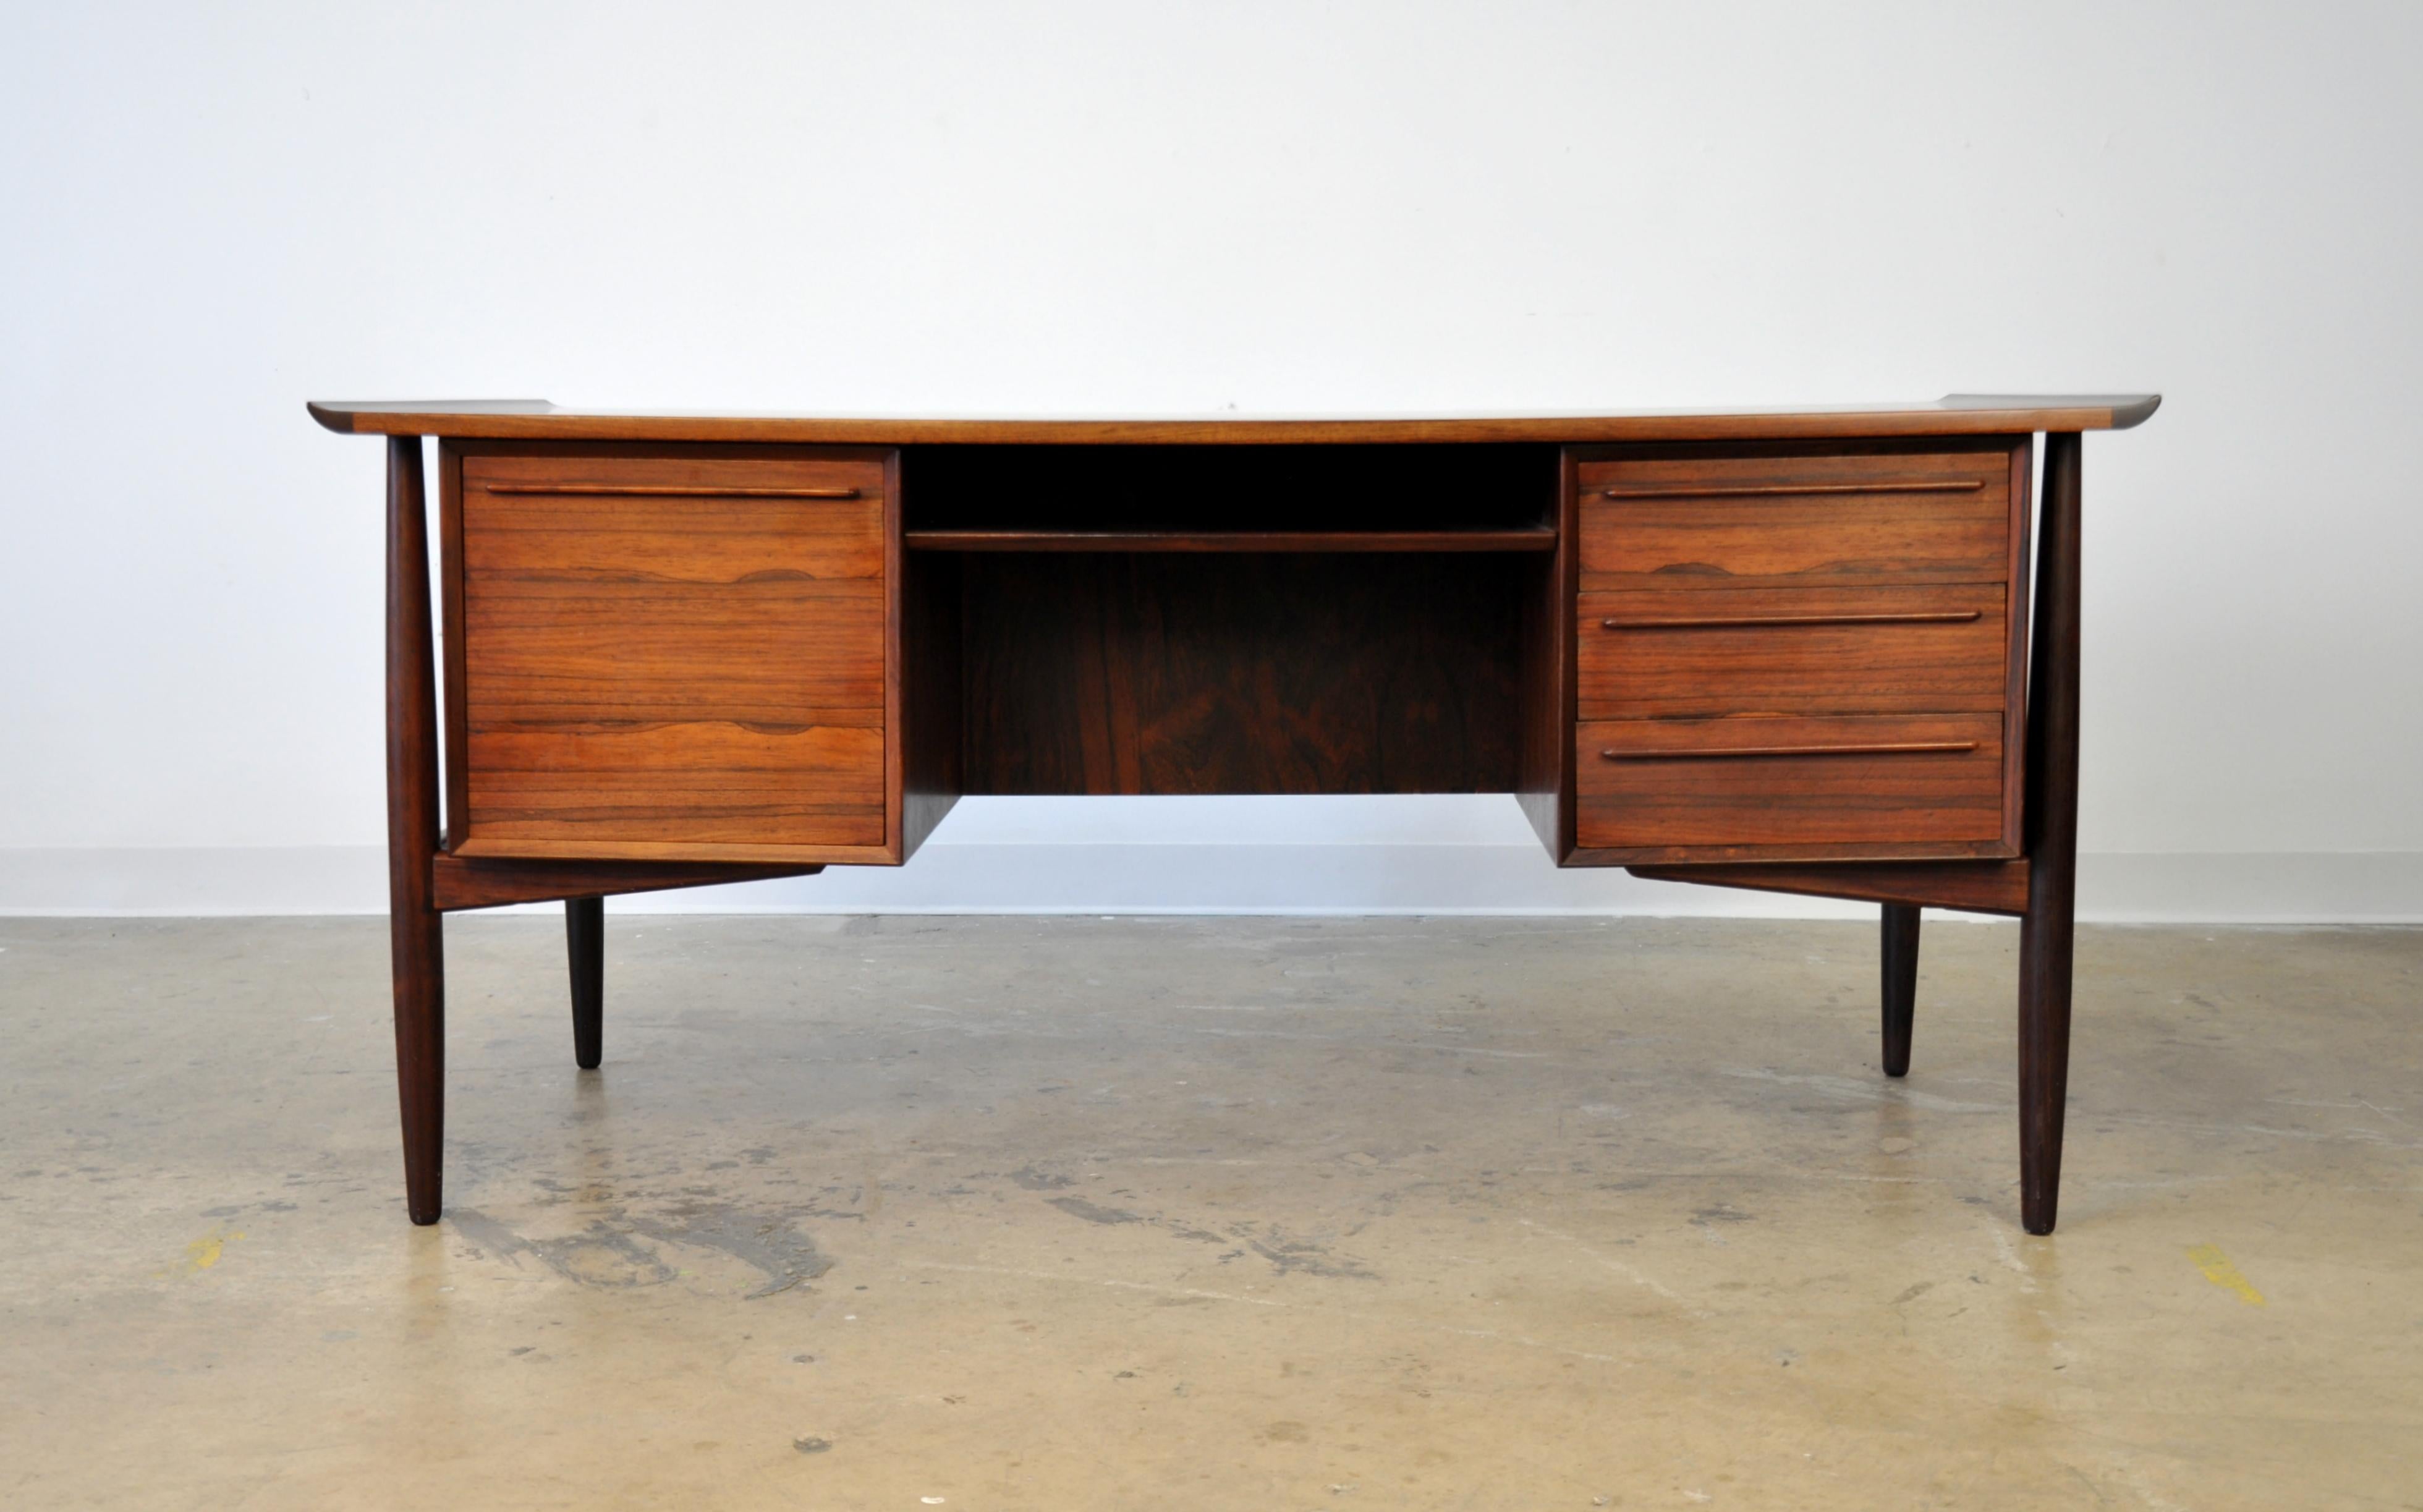 A stunning example of a vintage midcentury Danish modern executive desk or large vanity table by H.P. Hansen, dating from the 1960s. Of gleaming Brazilian rosewood, the writing table features a curved top over three drawers, a fixed shelf and a